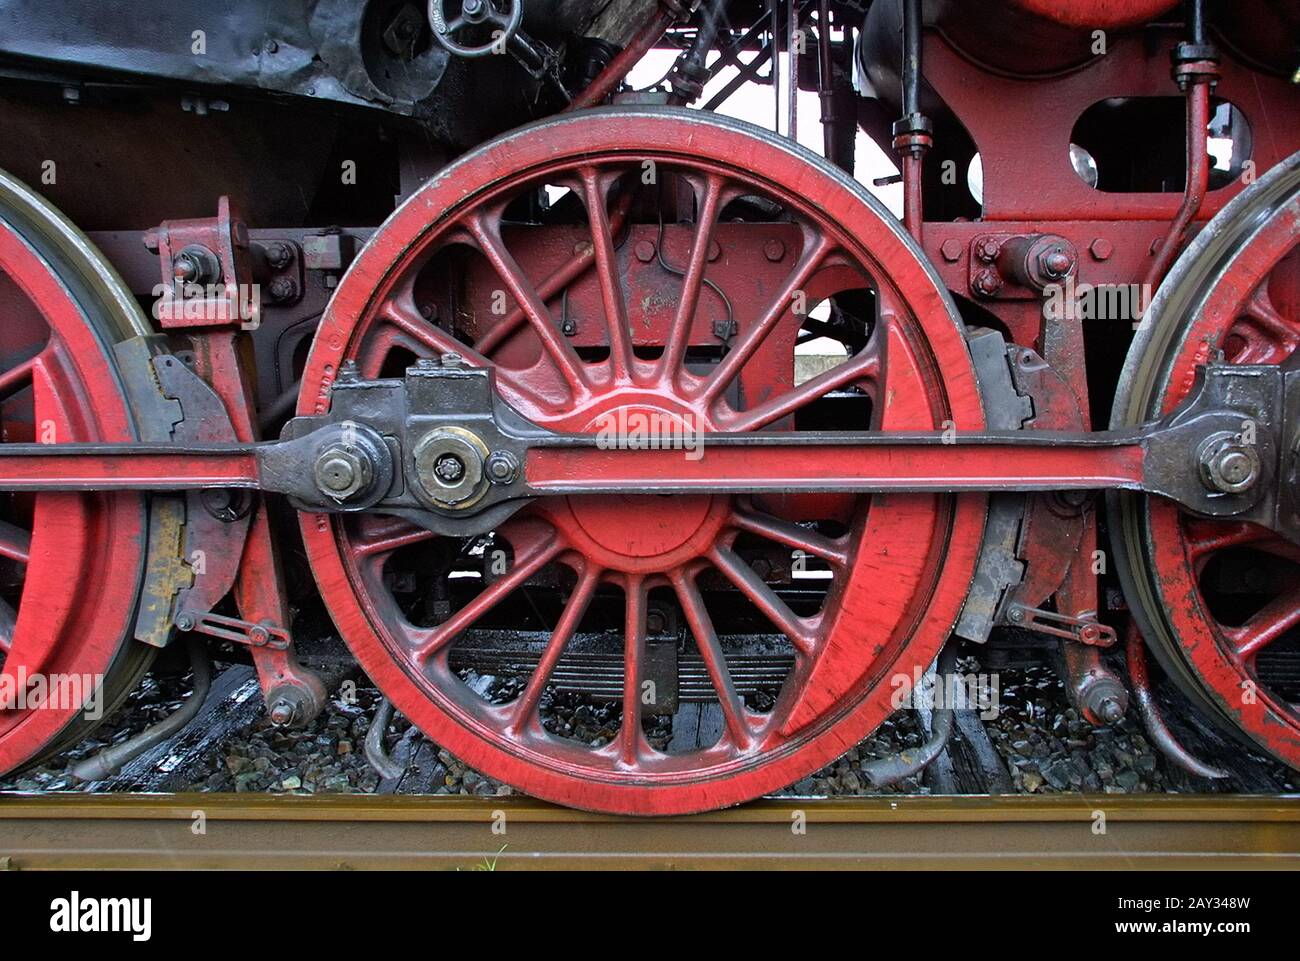 How to Drive a Steam Locomotive: 11 Steps (with Pictures)